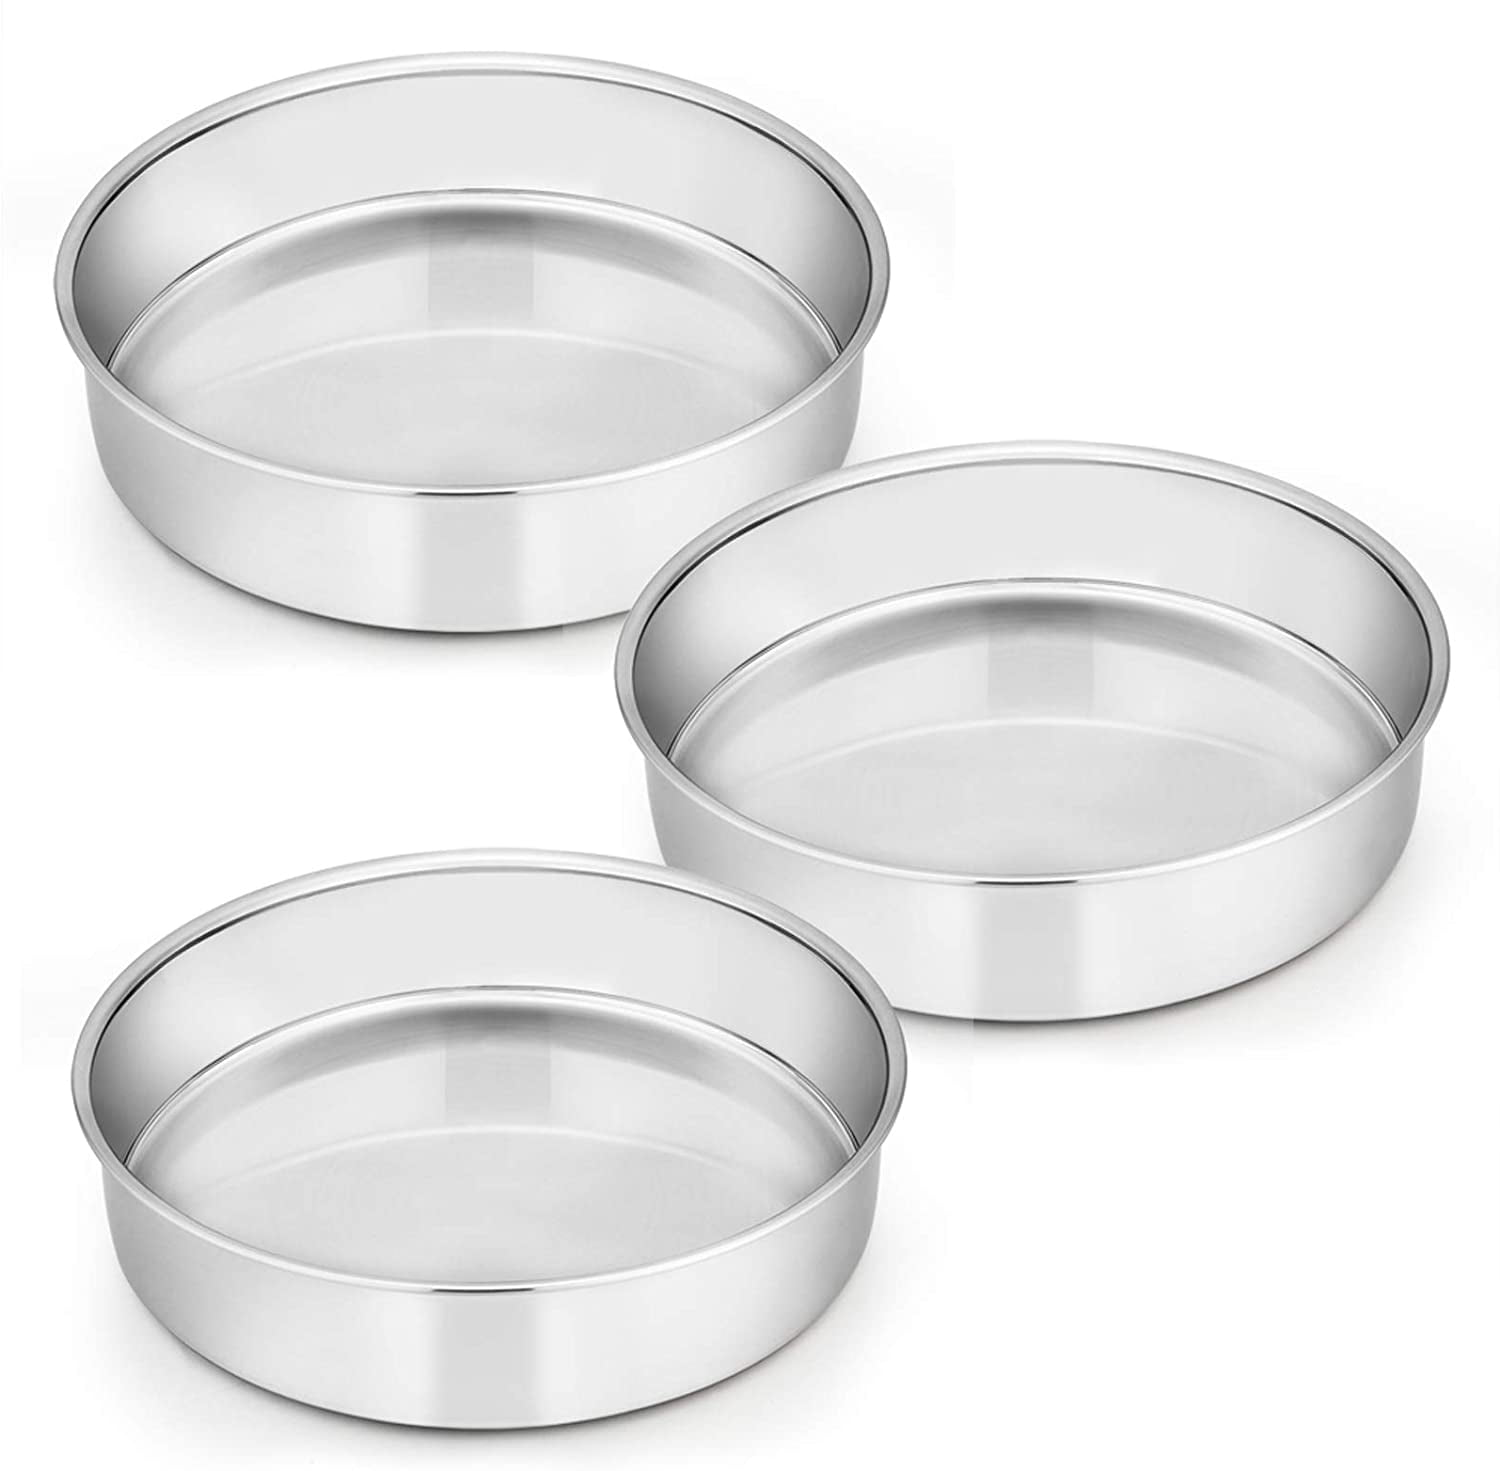 Pack of 4 Norpro Stainless Steel Loaf Pan with Mirror Finish 8 ½ x 4 ½ Inches 